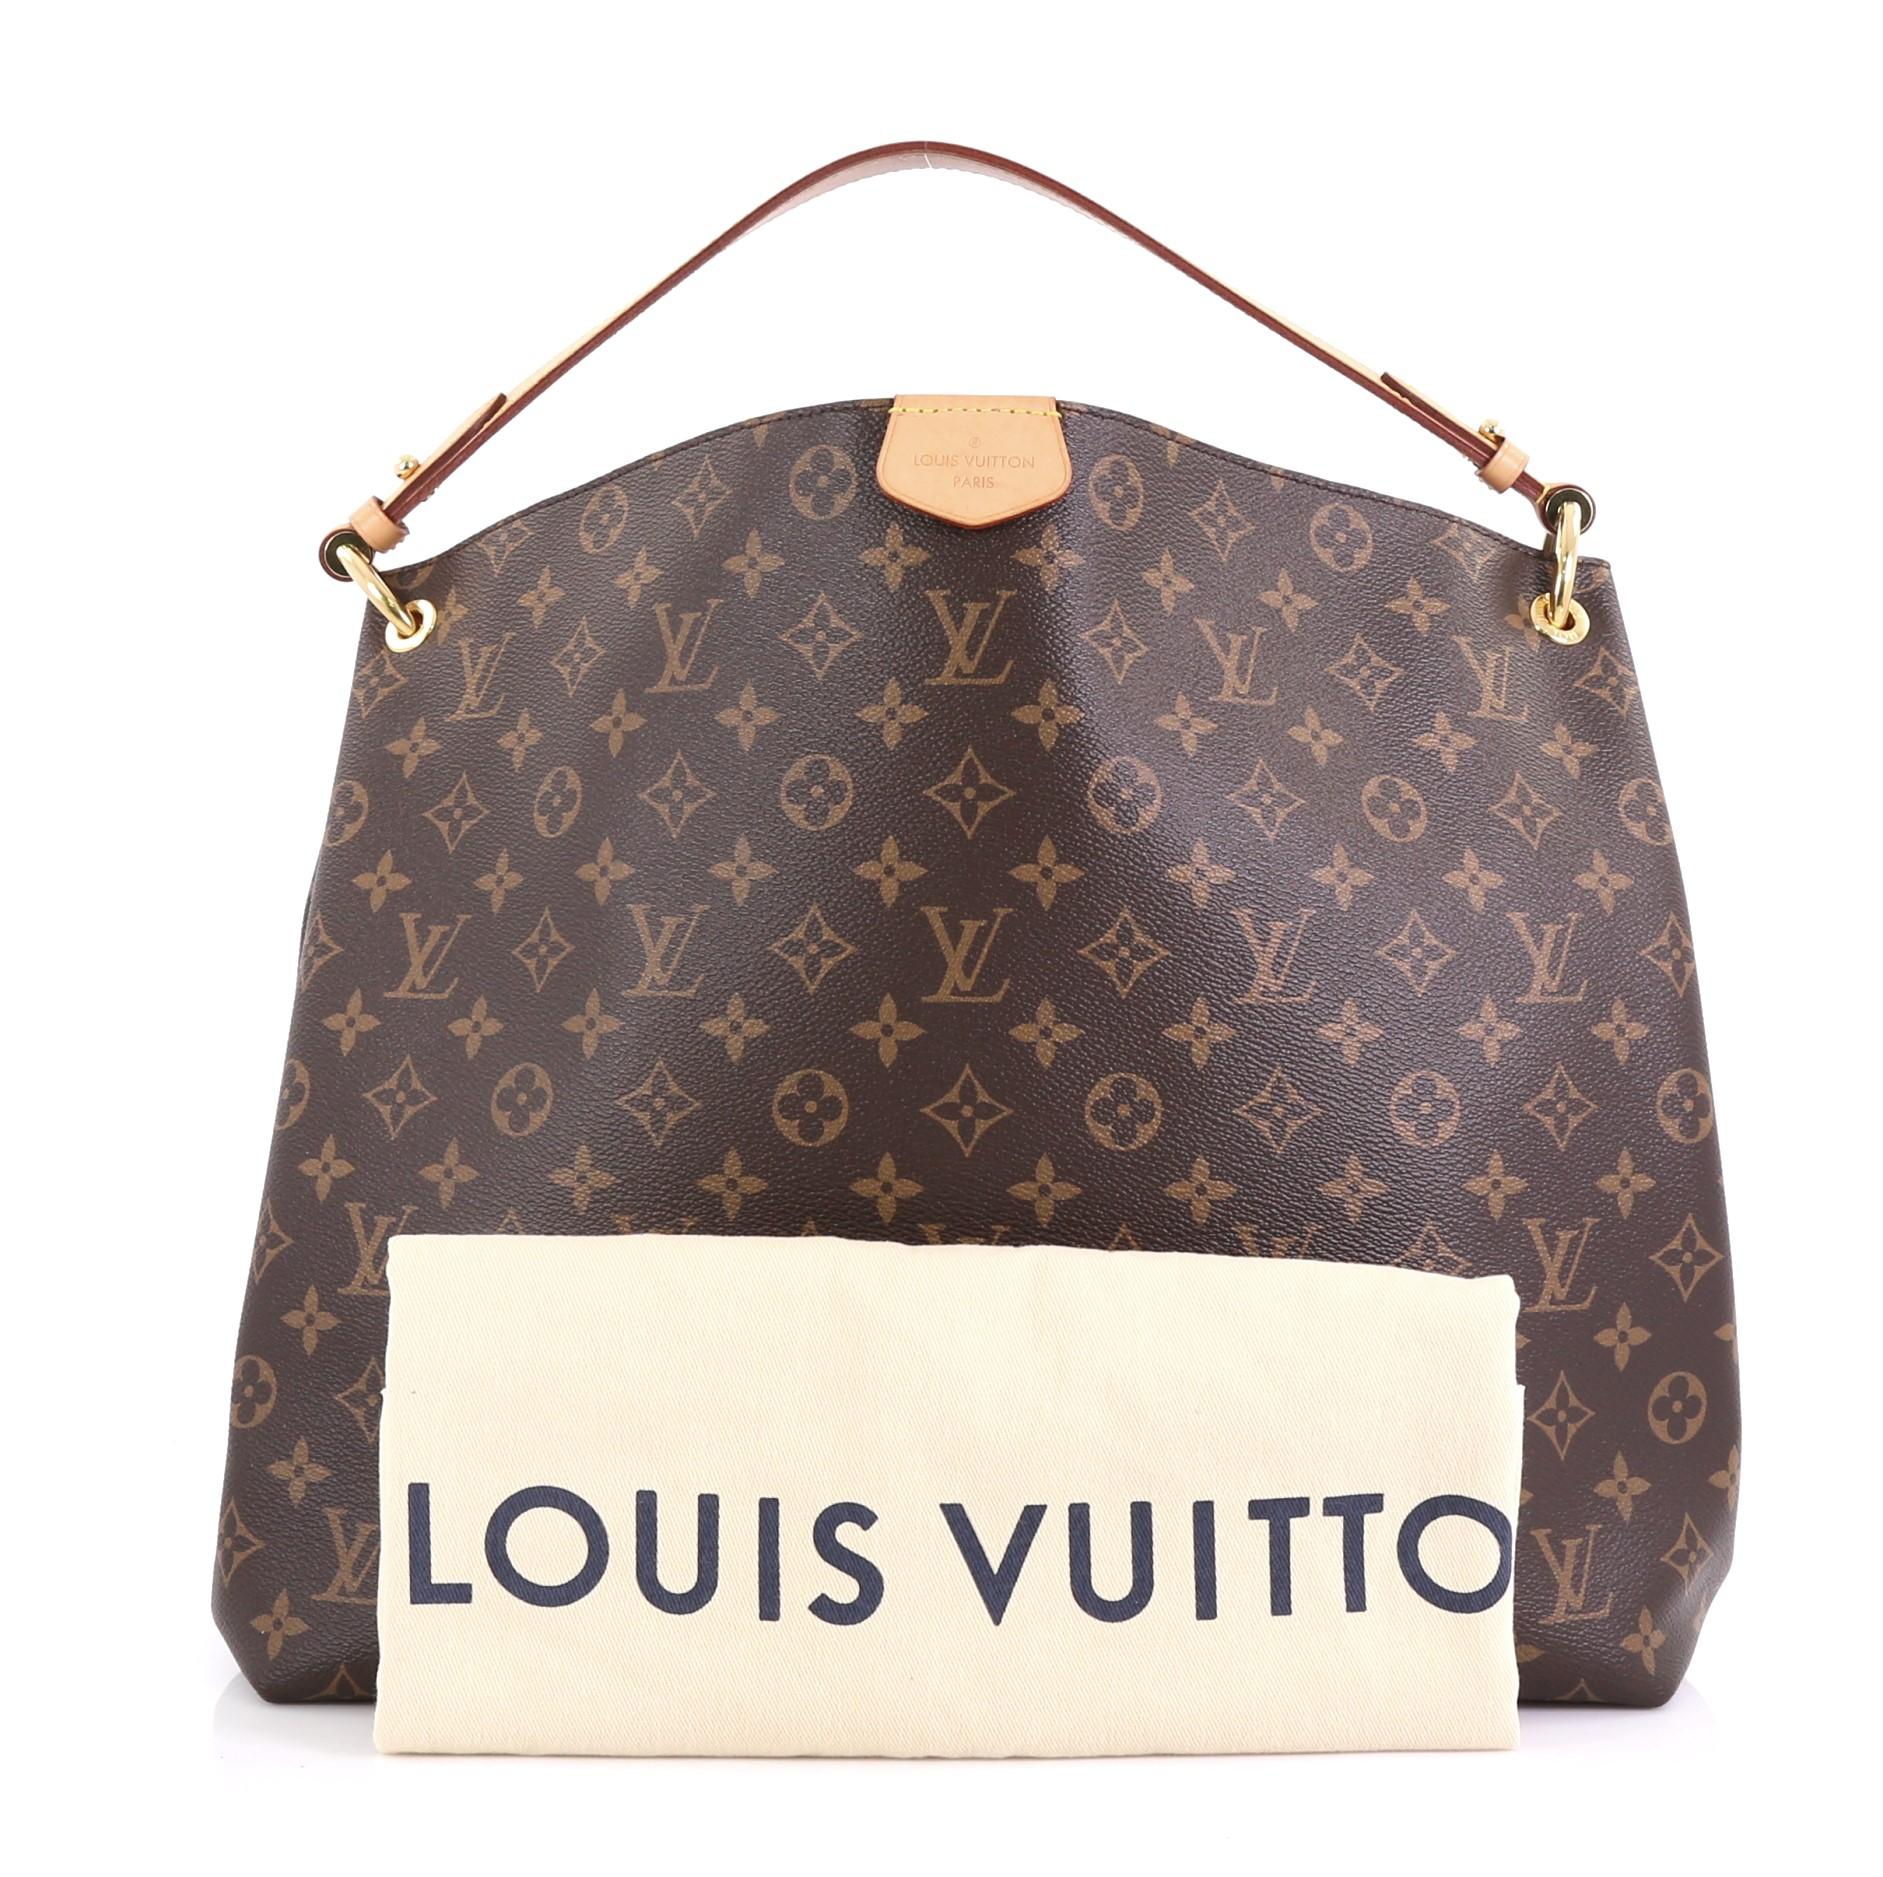 This Louis Vuitton Graceful Handbag Monogram Canvas MM, crafted from brown monogram coated canvas, features a flat handle and gold-tone hardware. Its magnetic closure opens to a pink fabric interior with zip pocket. Authenticity code reads: RI3188.